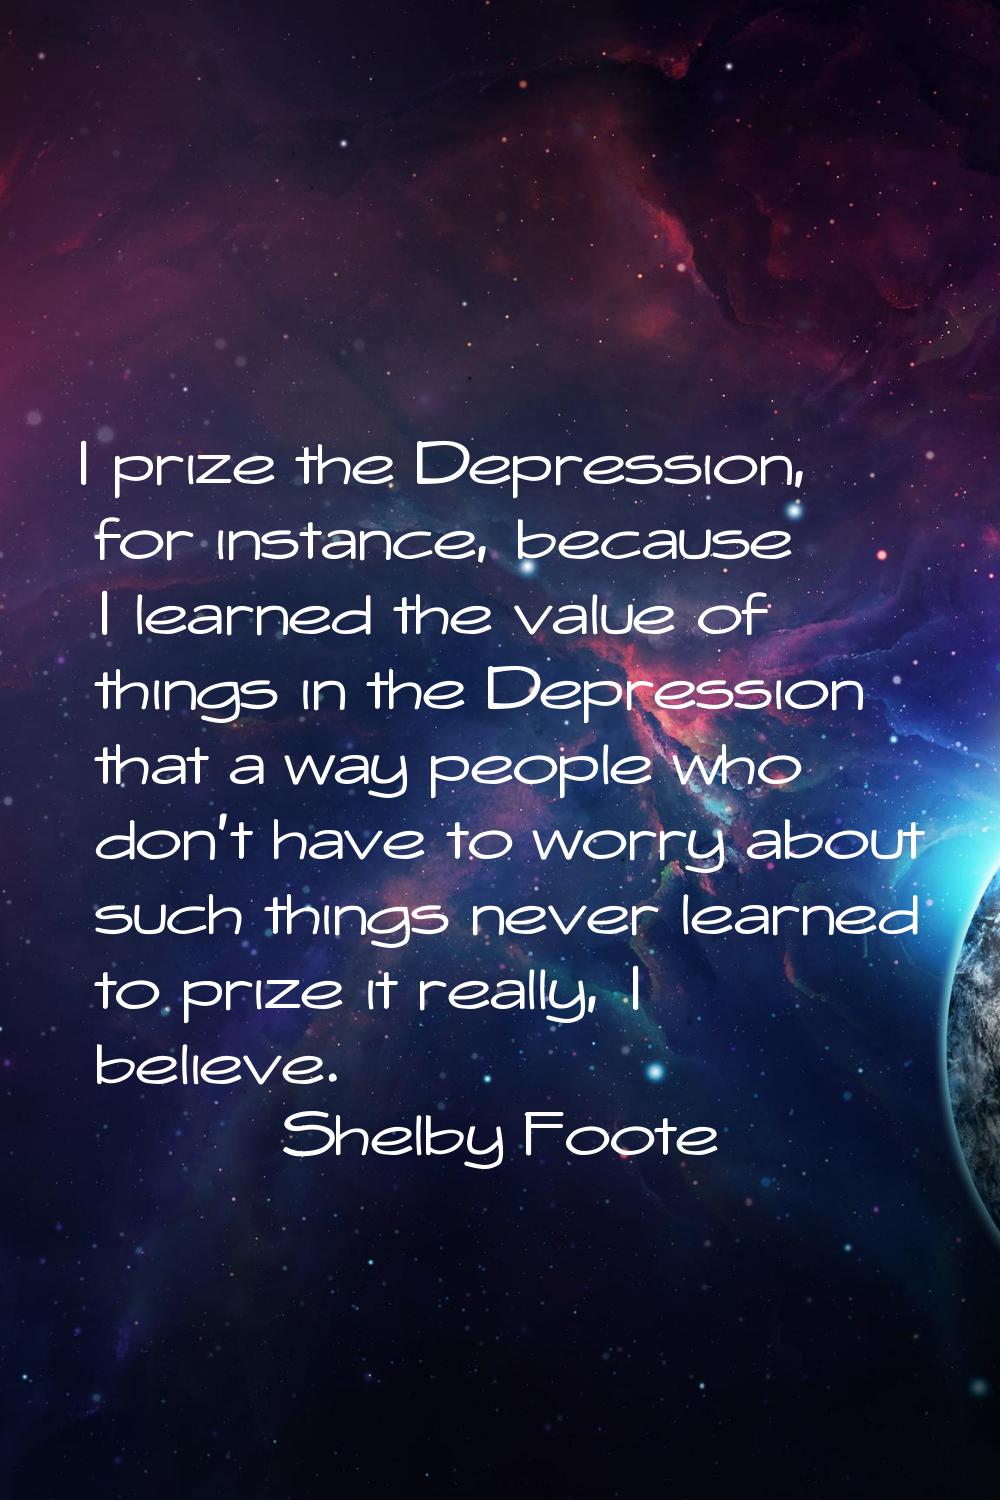 I prize the Depression, for instance, because I learned the value of things in the Depression that 